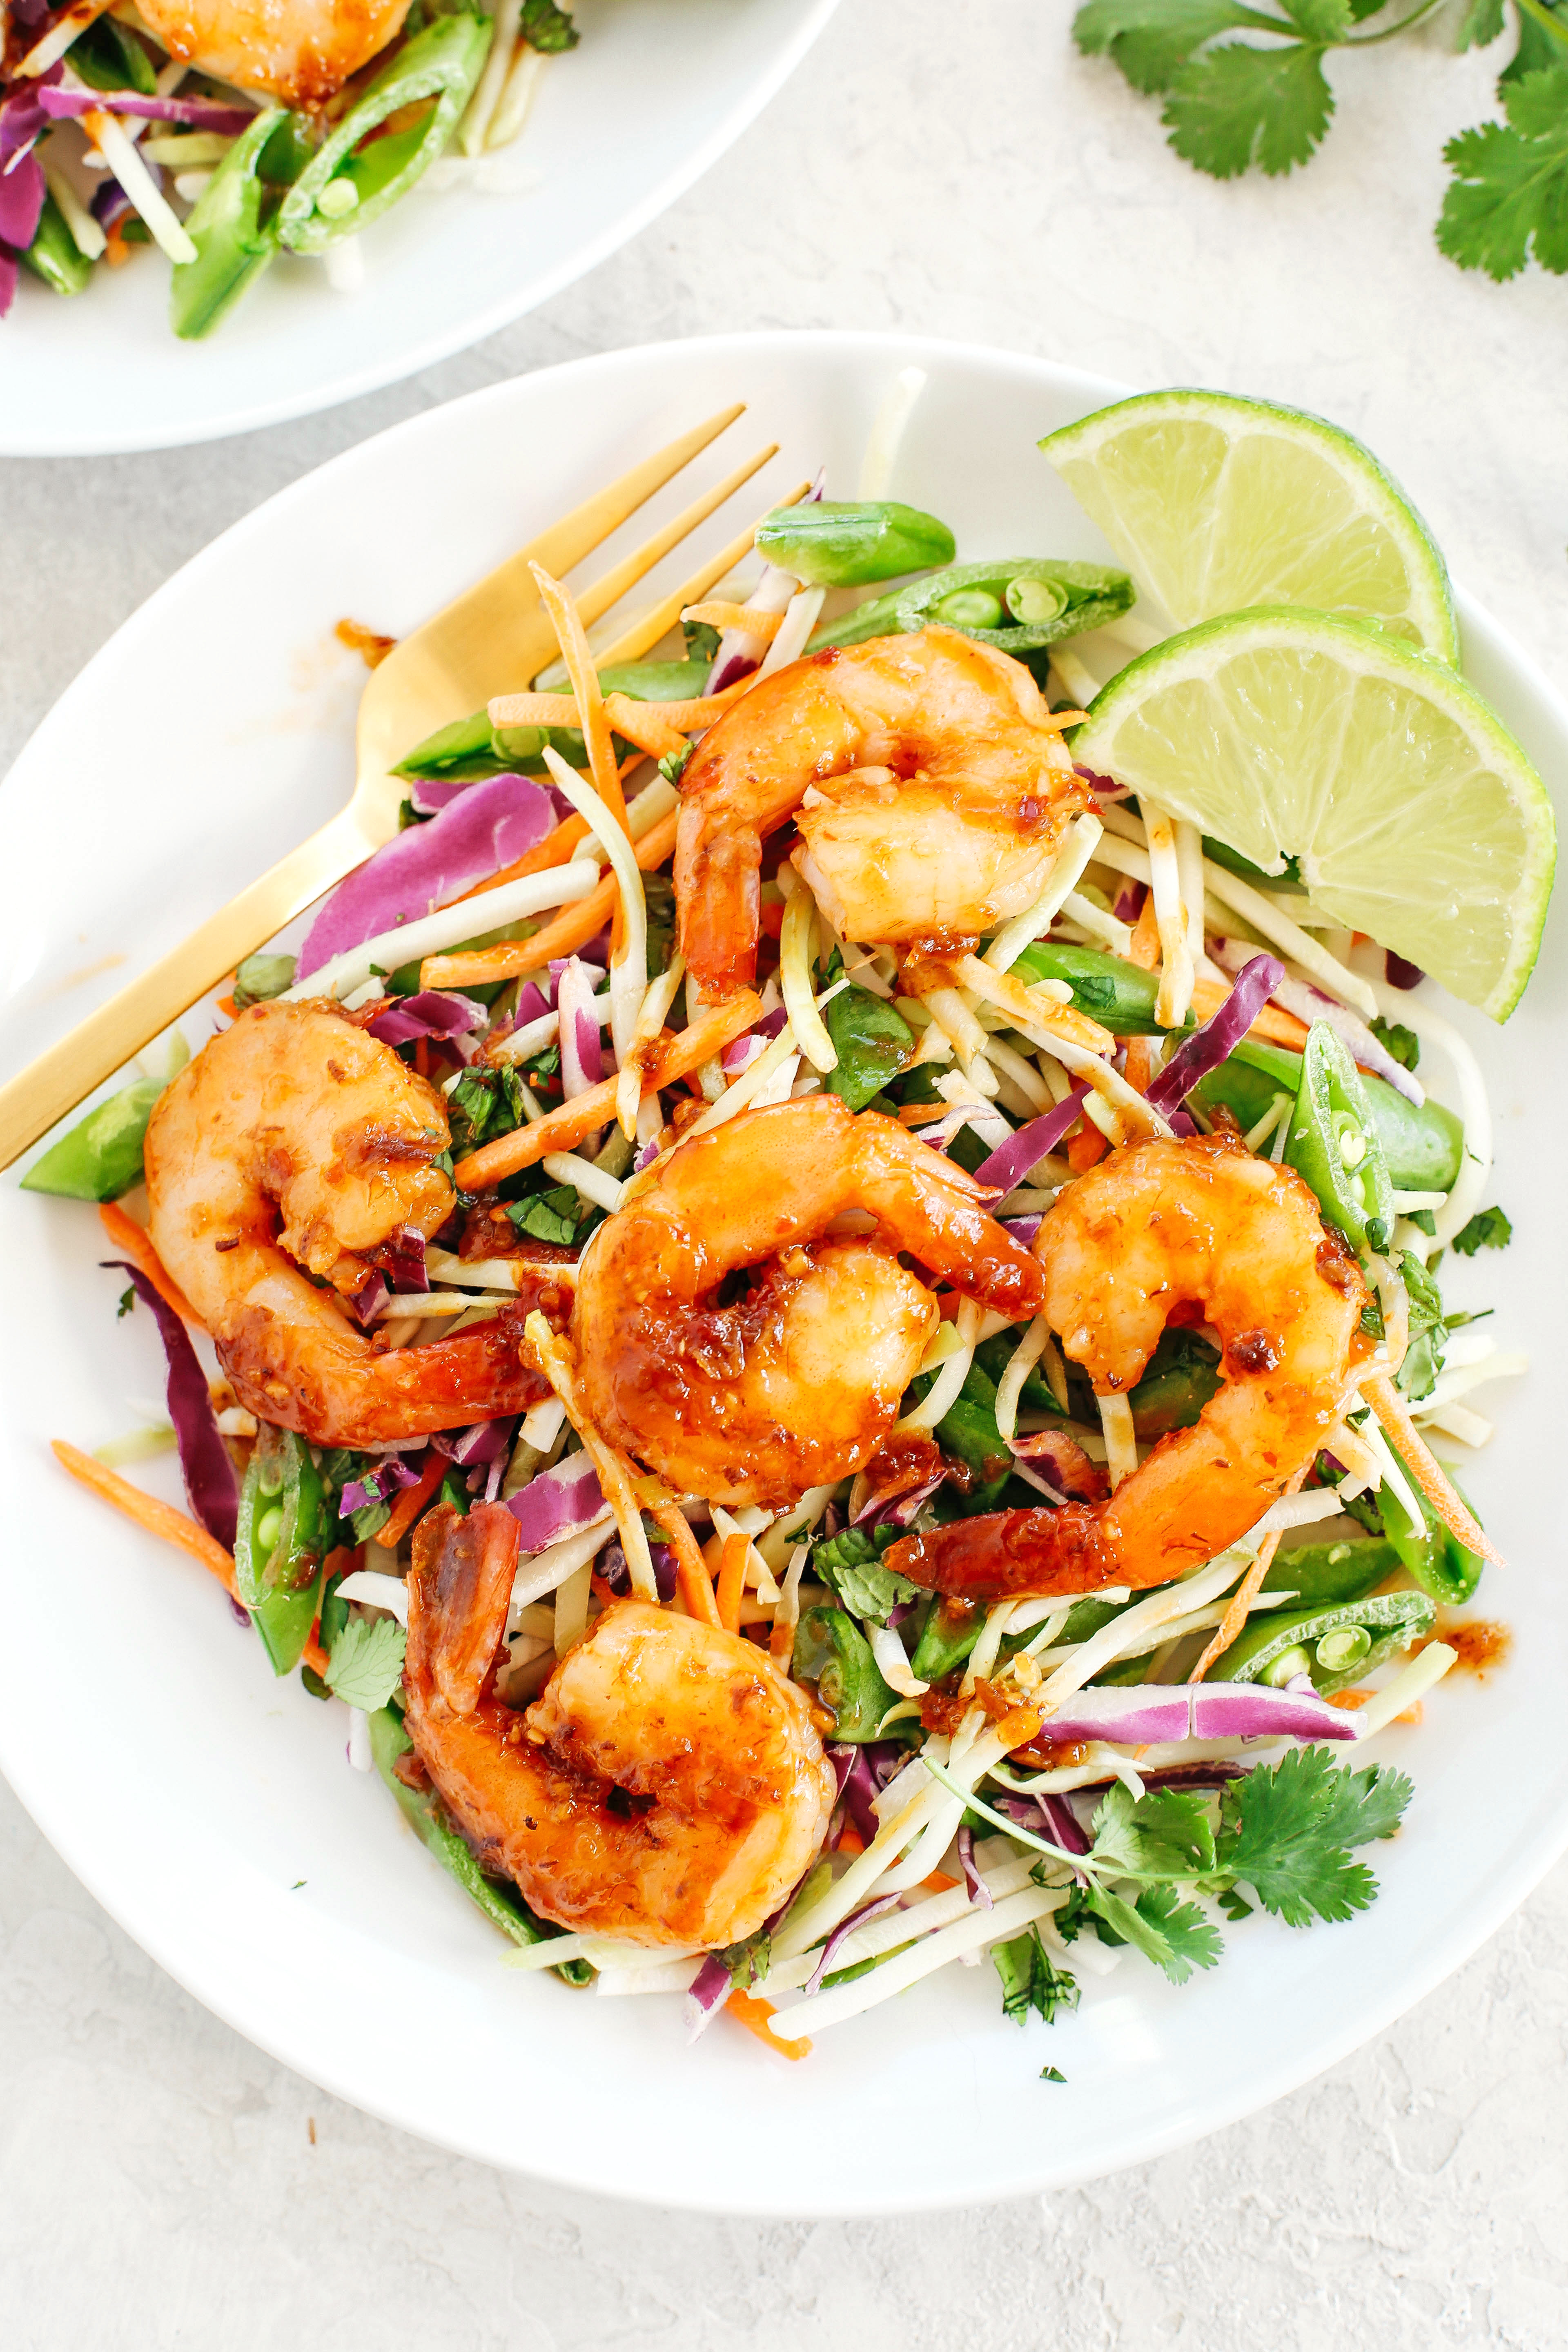 This quick and EASY Asian Shrimp Salad with Ginger Sesame Dressing is complete with all your favorite flavors, crunchy veggies and fresh herbs that can be easily made in just minutes!